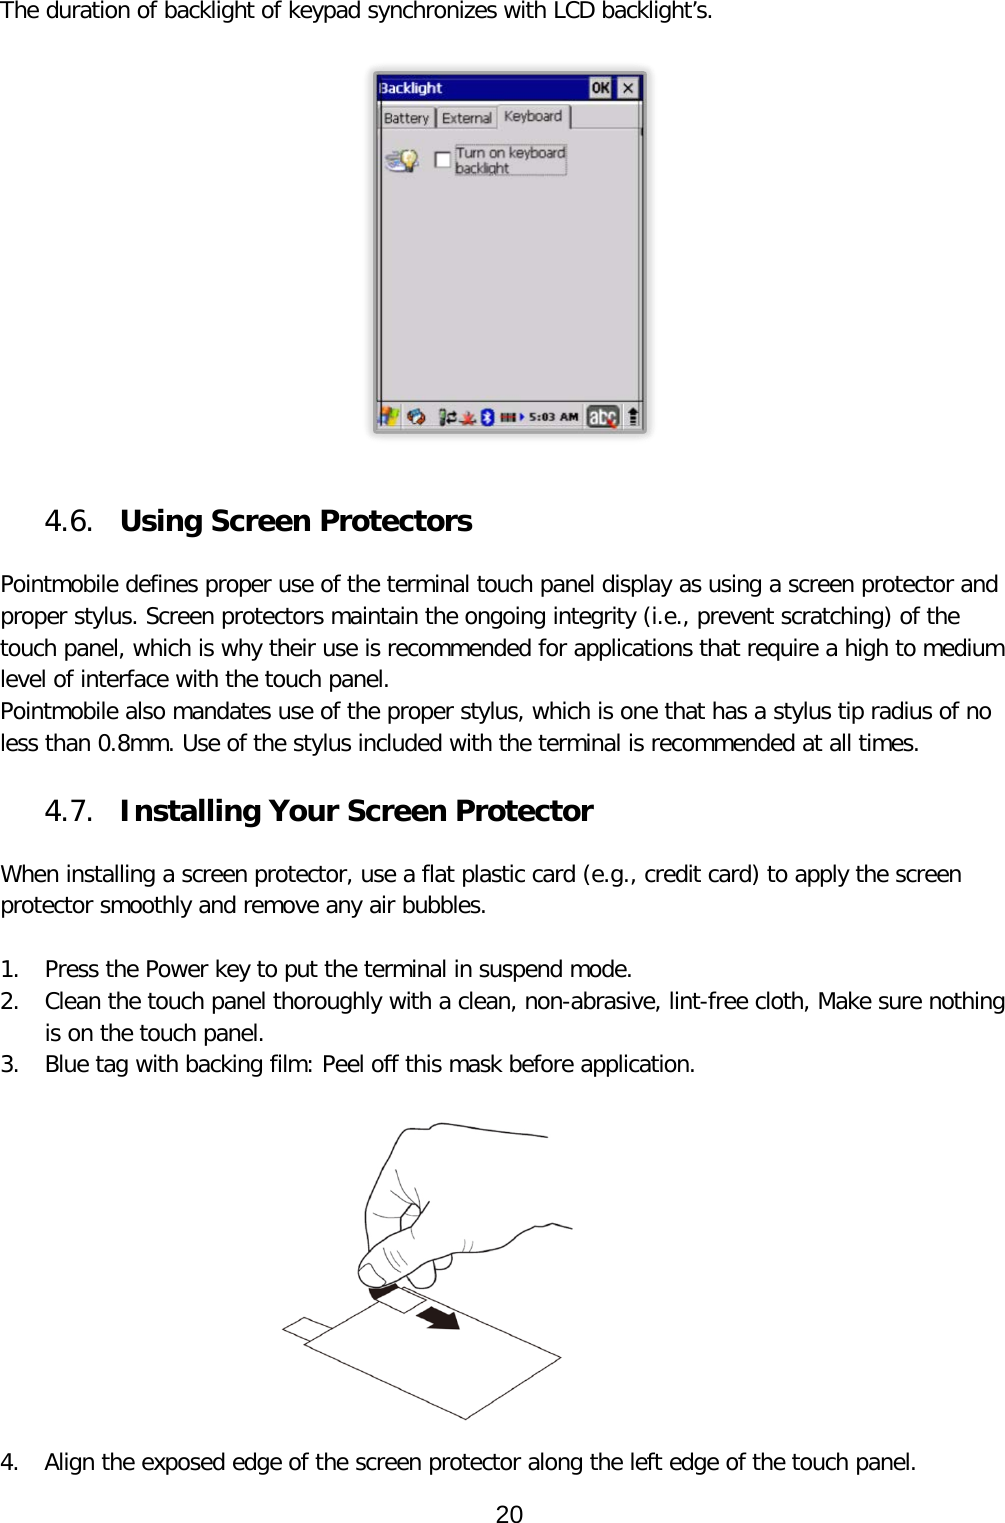 The duration of backlight of keypad synchronizes with LCD backlight’s.     4.6. Using Screen Protectors  Pointmobile defines proper use of the terminal touch panel display as using a screen protector and proper stylus. Screen protectors maintain the ongoing integrity (i.e., prevent scratching) of the touch panel, which is why their use is recommended for applications that require a high to medium level of interface with the touch panel.  Pointmobile also mandates use of the proper stylus, which is one that has a stylus tip radius of no less than 0.8mm. Use of the stylus included with the terminal is recommended at all times.  4.7. Installing Your Screen Protector  When installing a screen protector, use a flat plastic card (e.g., credit card) to apply the screen protector smoothly and remove any air bubbles.   1. Press the Power key to put the terminal in suspend mode.  2. Clean the touch panel thoroughly with a clean, non-abrasive, lint-free cloth, Make sure nothing is on the touch panel.  3. Blue tag with backing film: Peel off this mask before application.    4. Align the exposed edge of the screen protector along the left edge of the touch panel.  20  